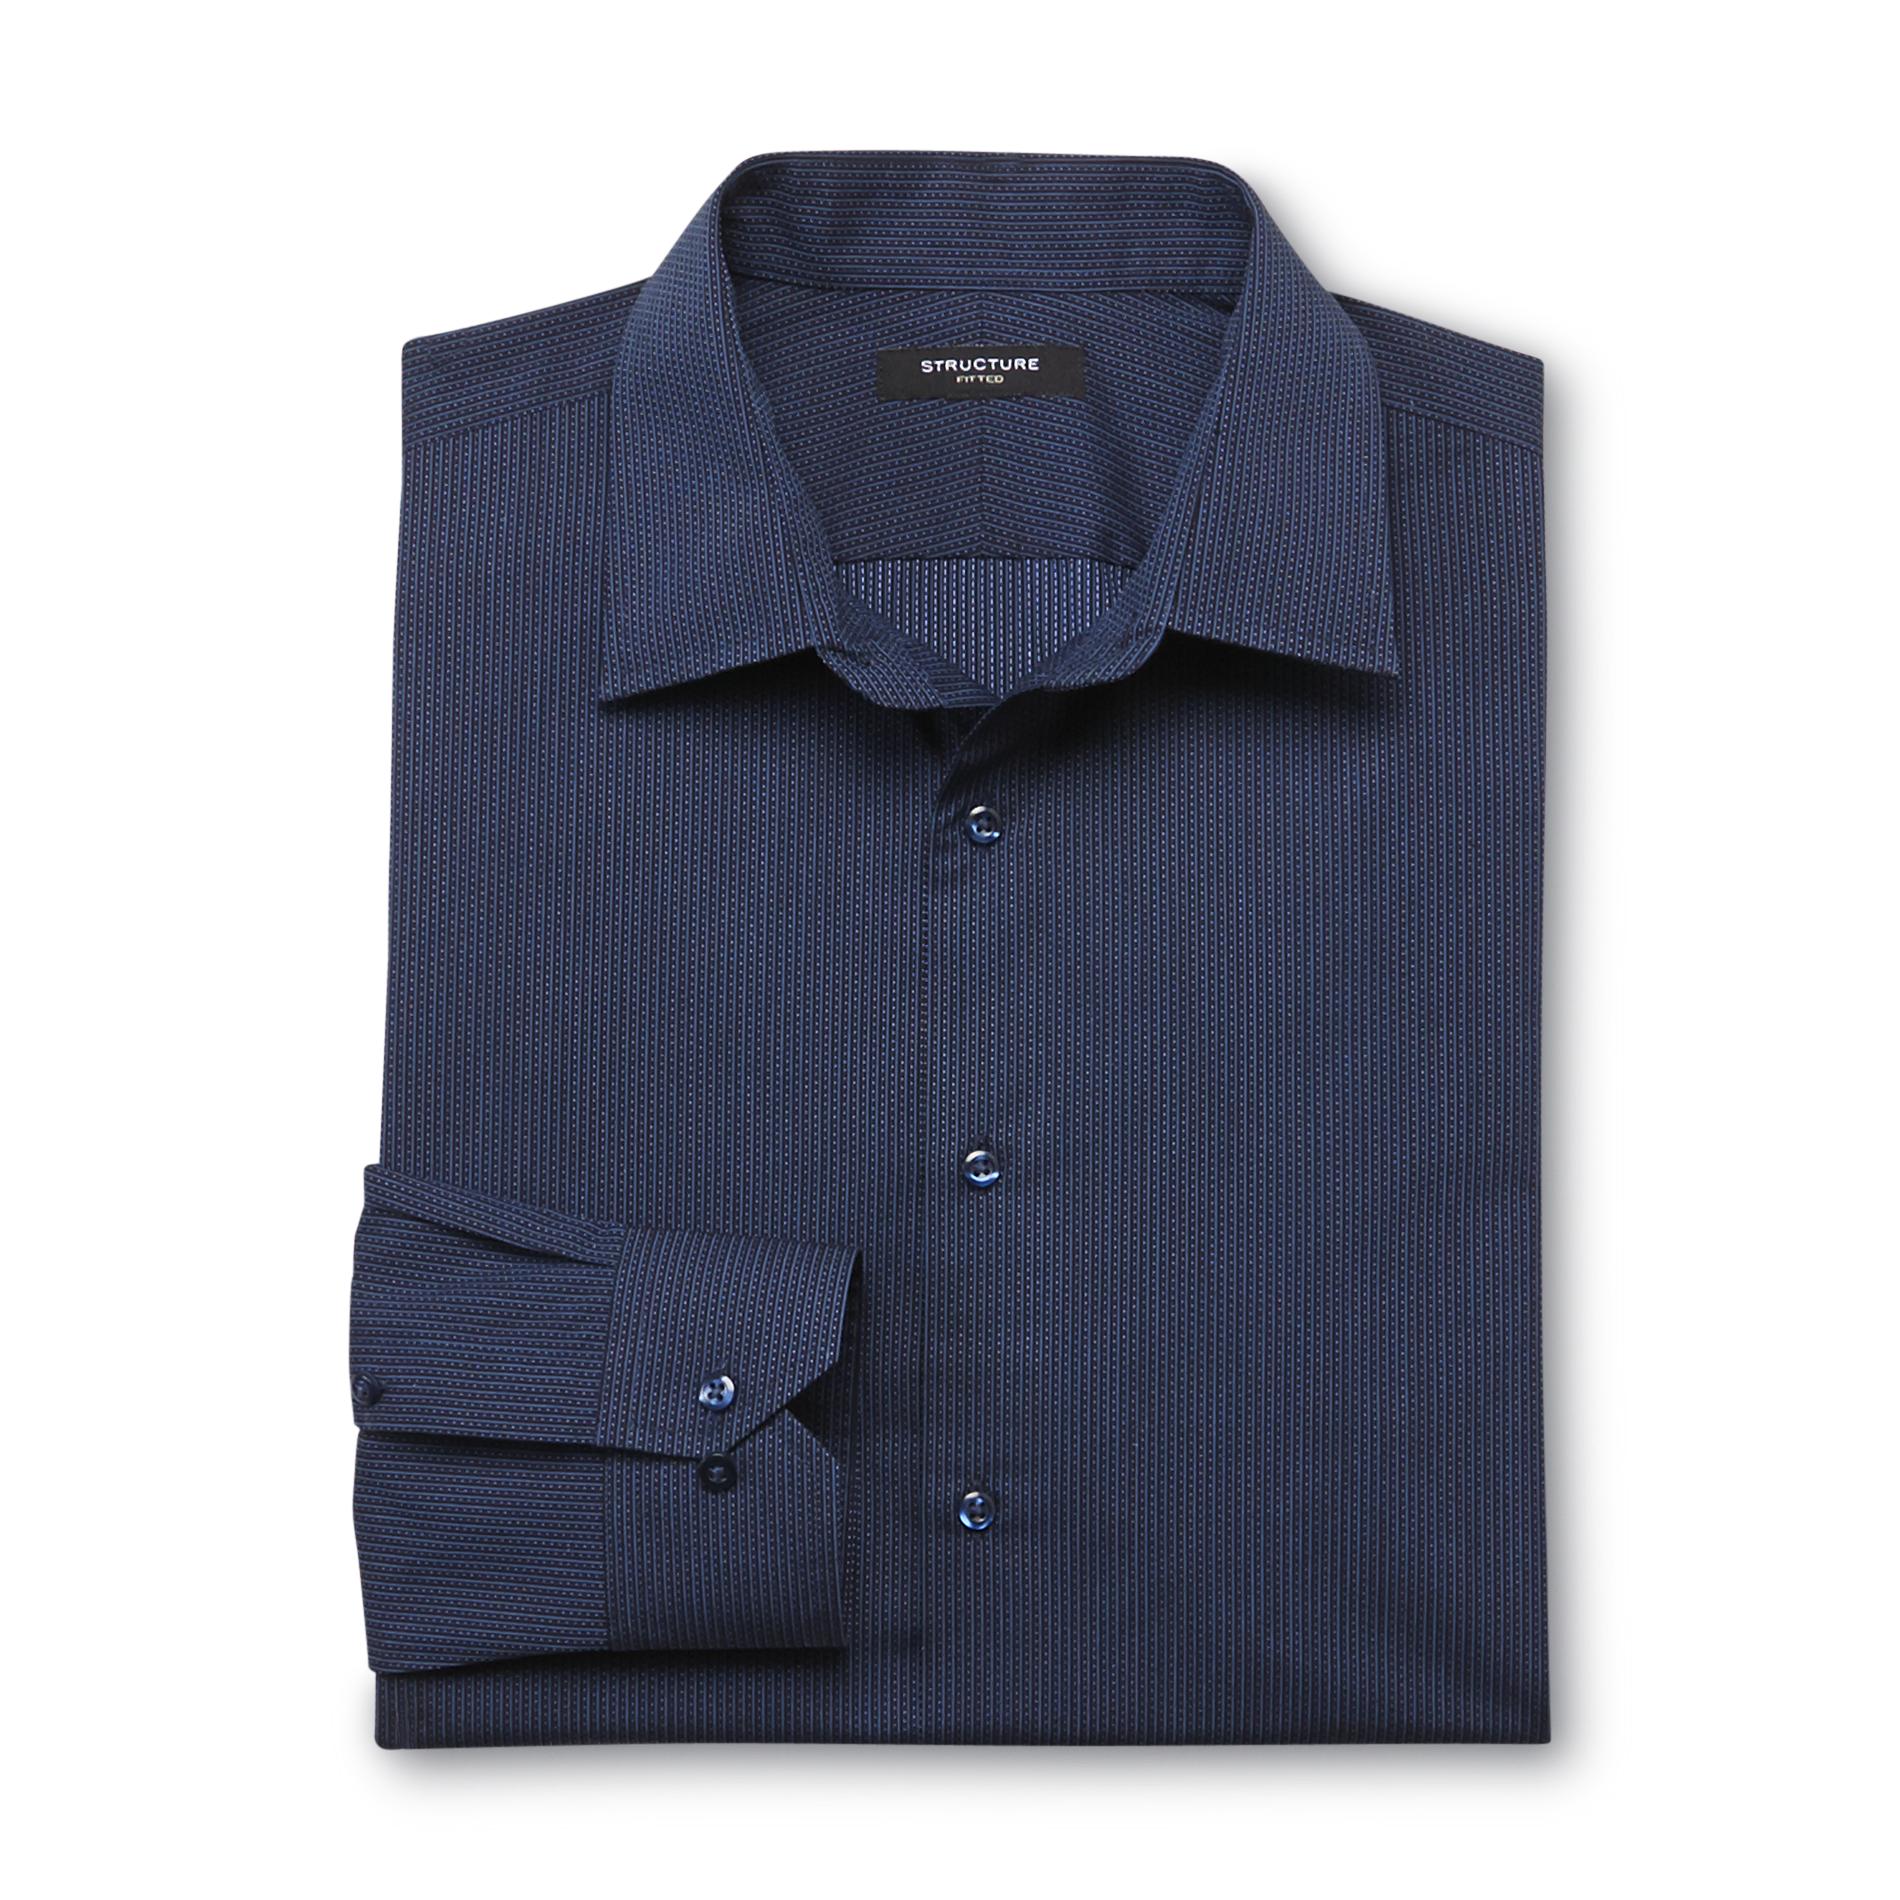 Structure Men's Fitted Dress Shirt - Microdot